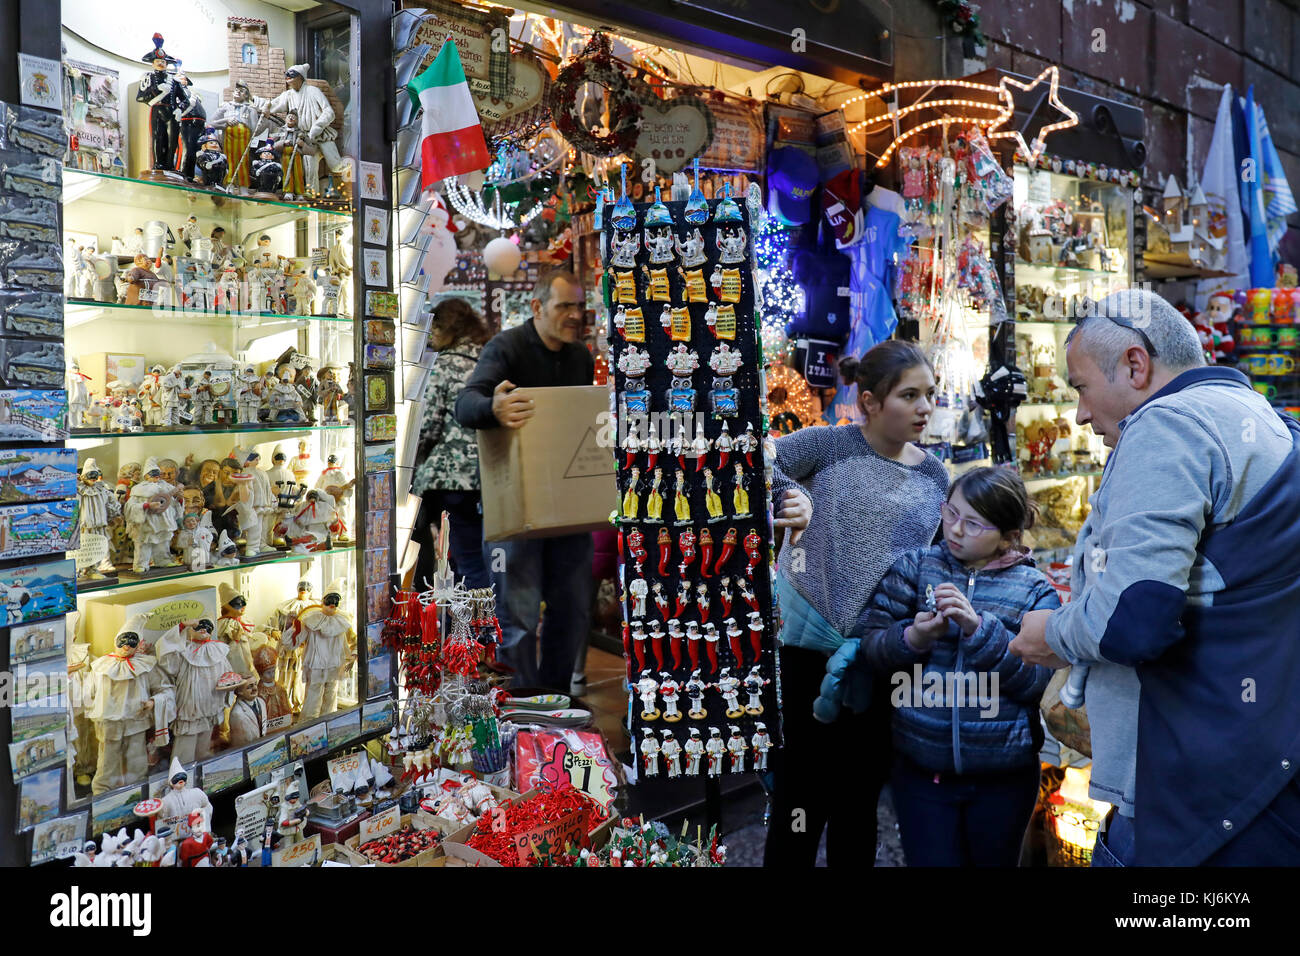 Naples, Italy - November 18, 2017: The Christmas holiday atmosphere in the heart of the city. Via San Biagio dei Librai, exhibition and sale of small  Stock Photo